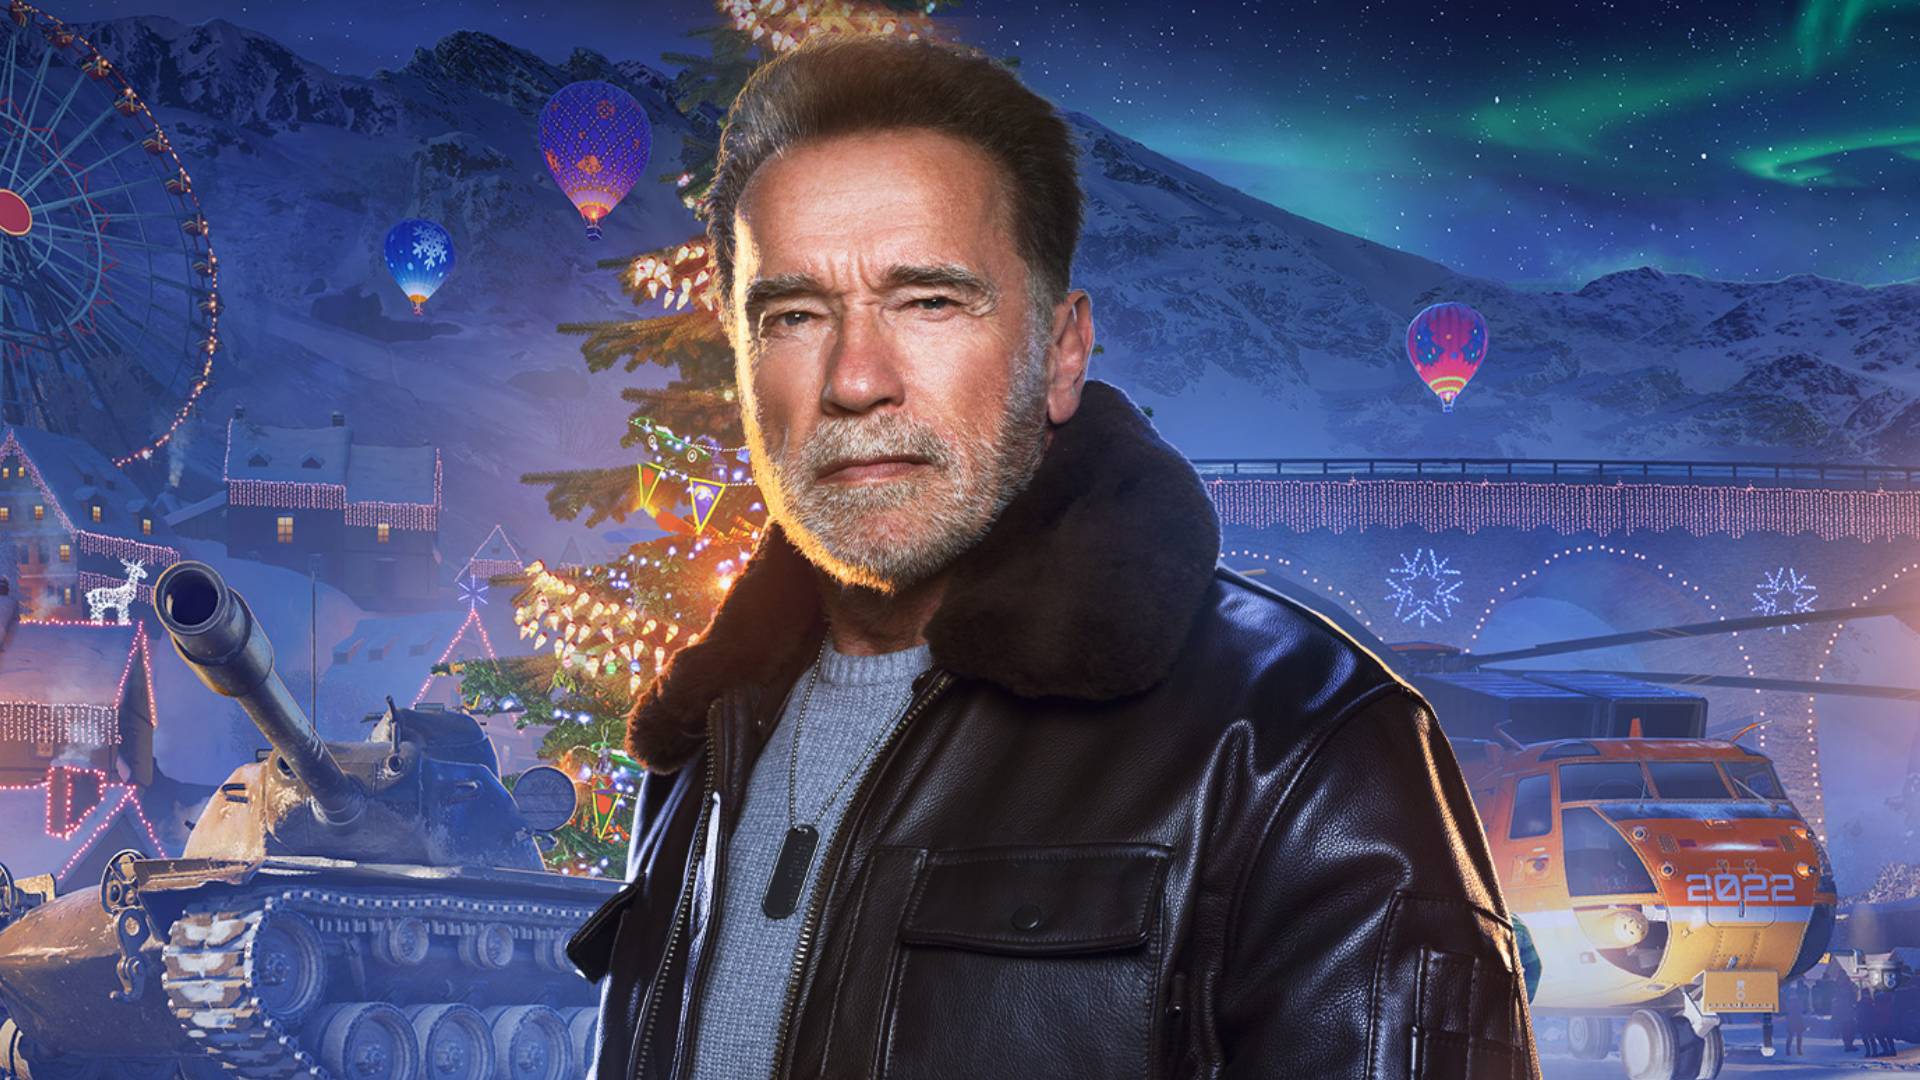 Arnold Schwarzenegger Still Has The Look To Play 'Dutch' - Action Reloaded